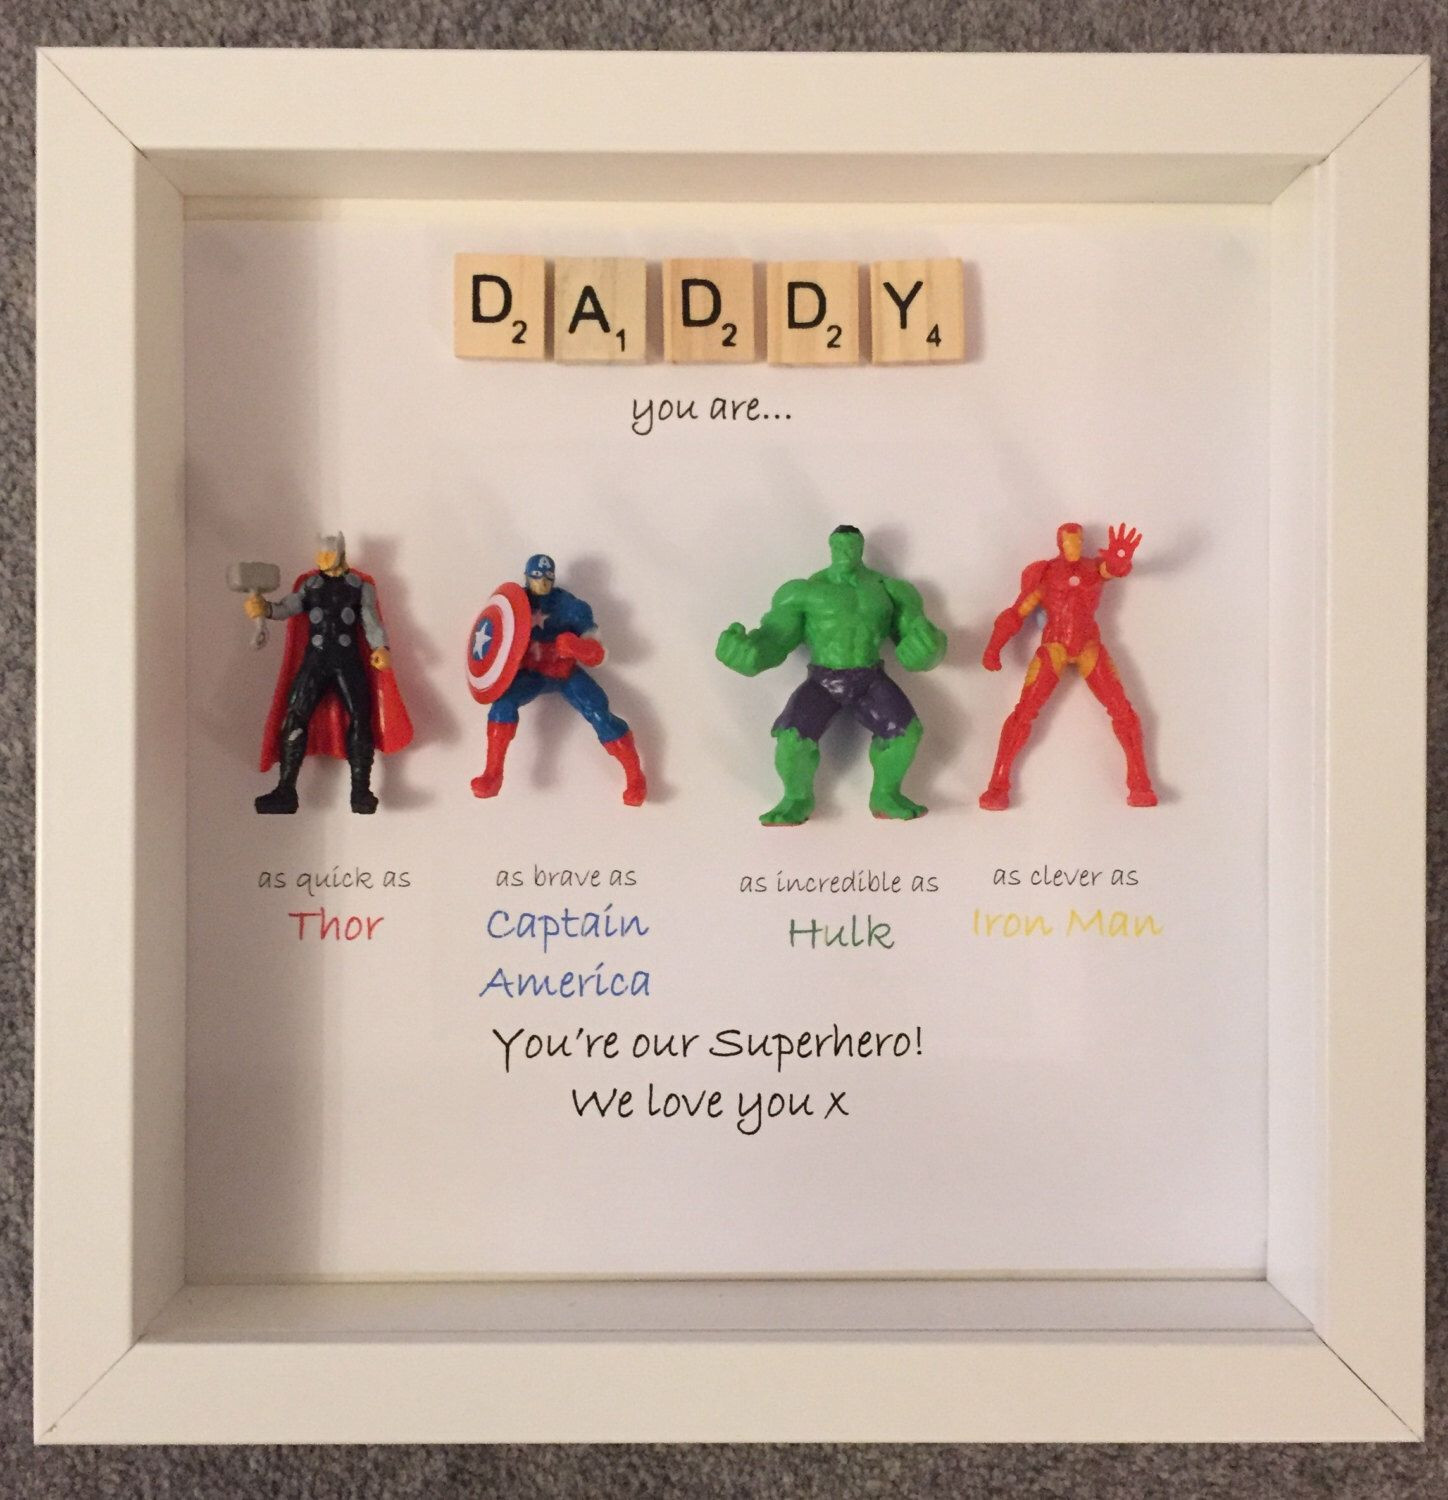 Gift Ideas For Dad Birthday
 Avengers Superhero figures frame t Ideal for dad